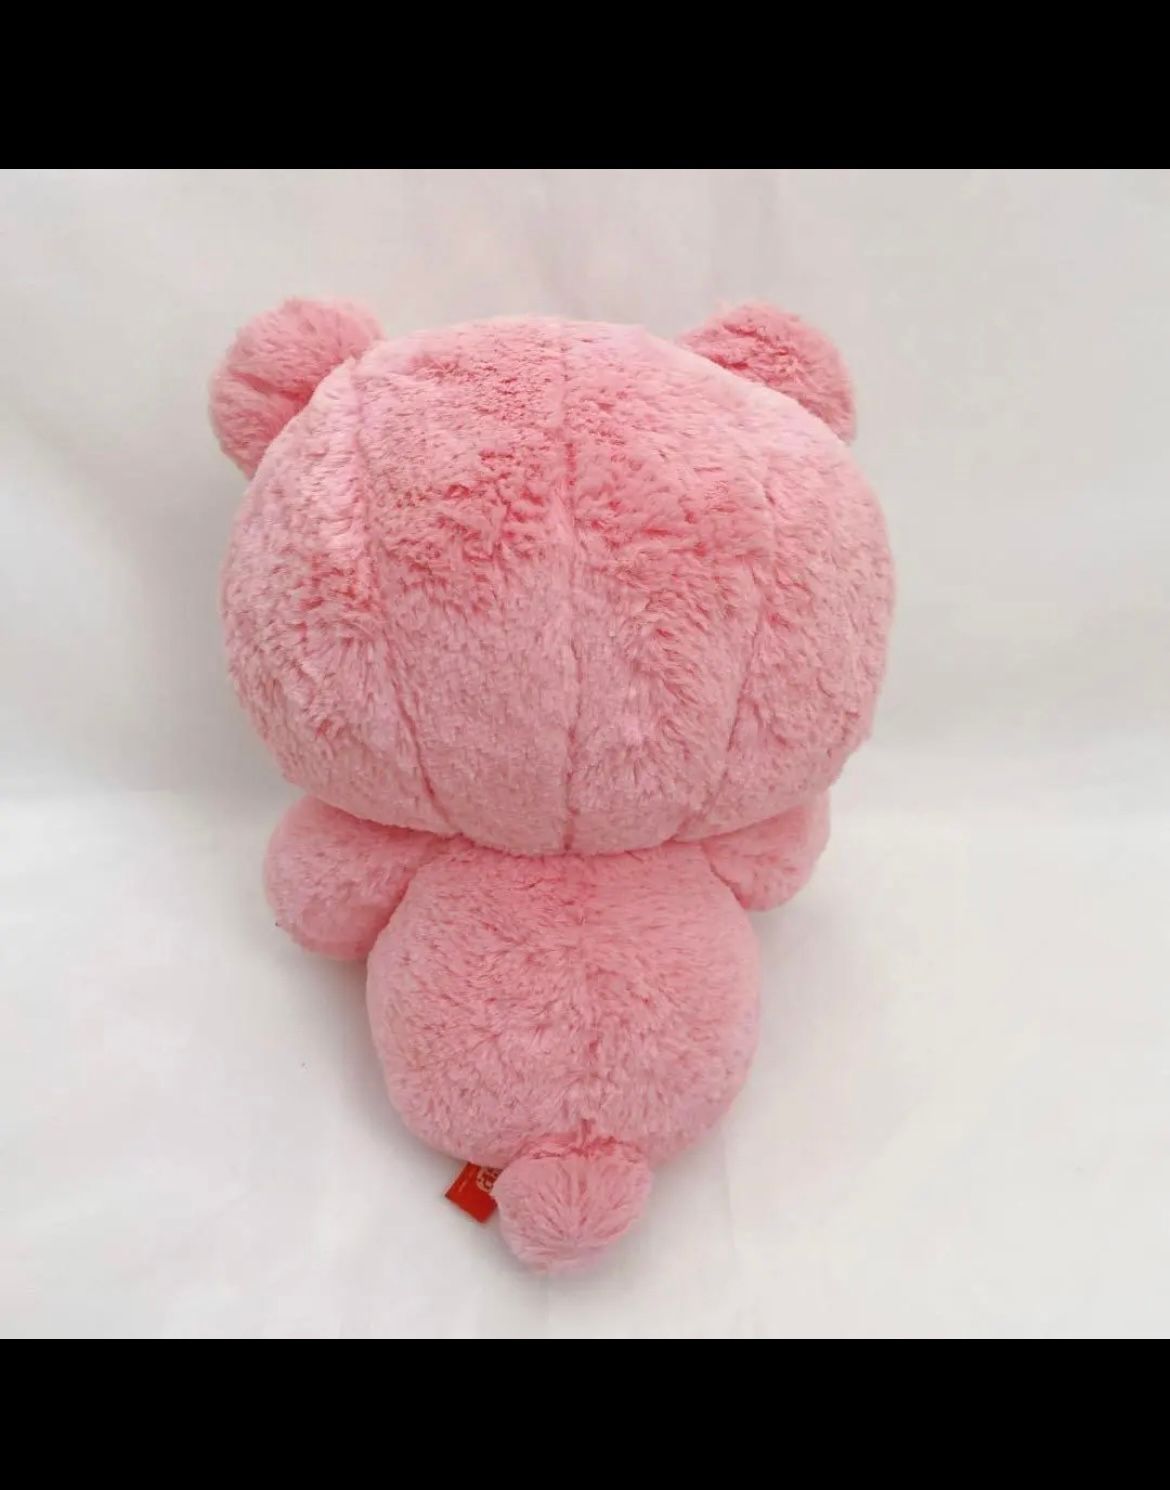 This is an offer made on the Request: Baby Gloomy Bear